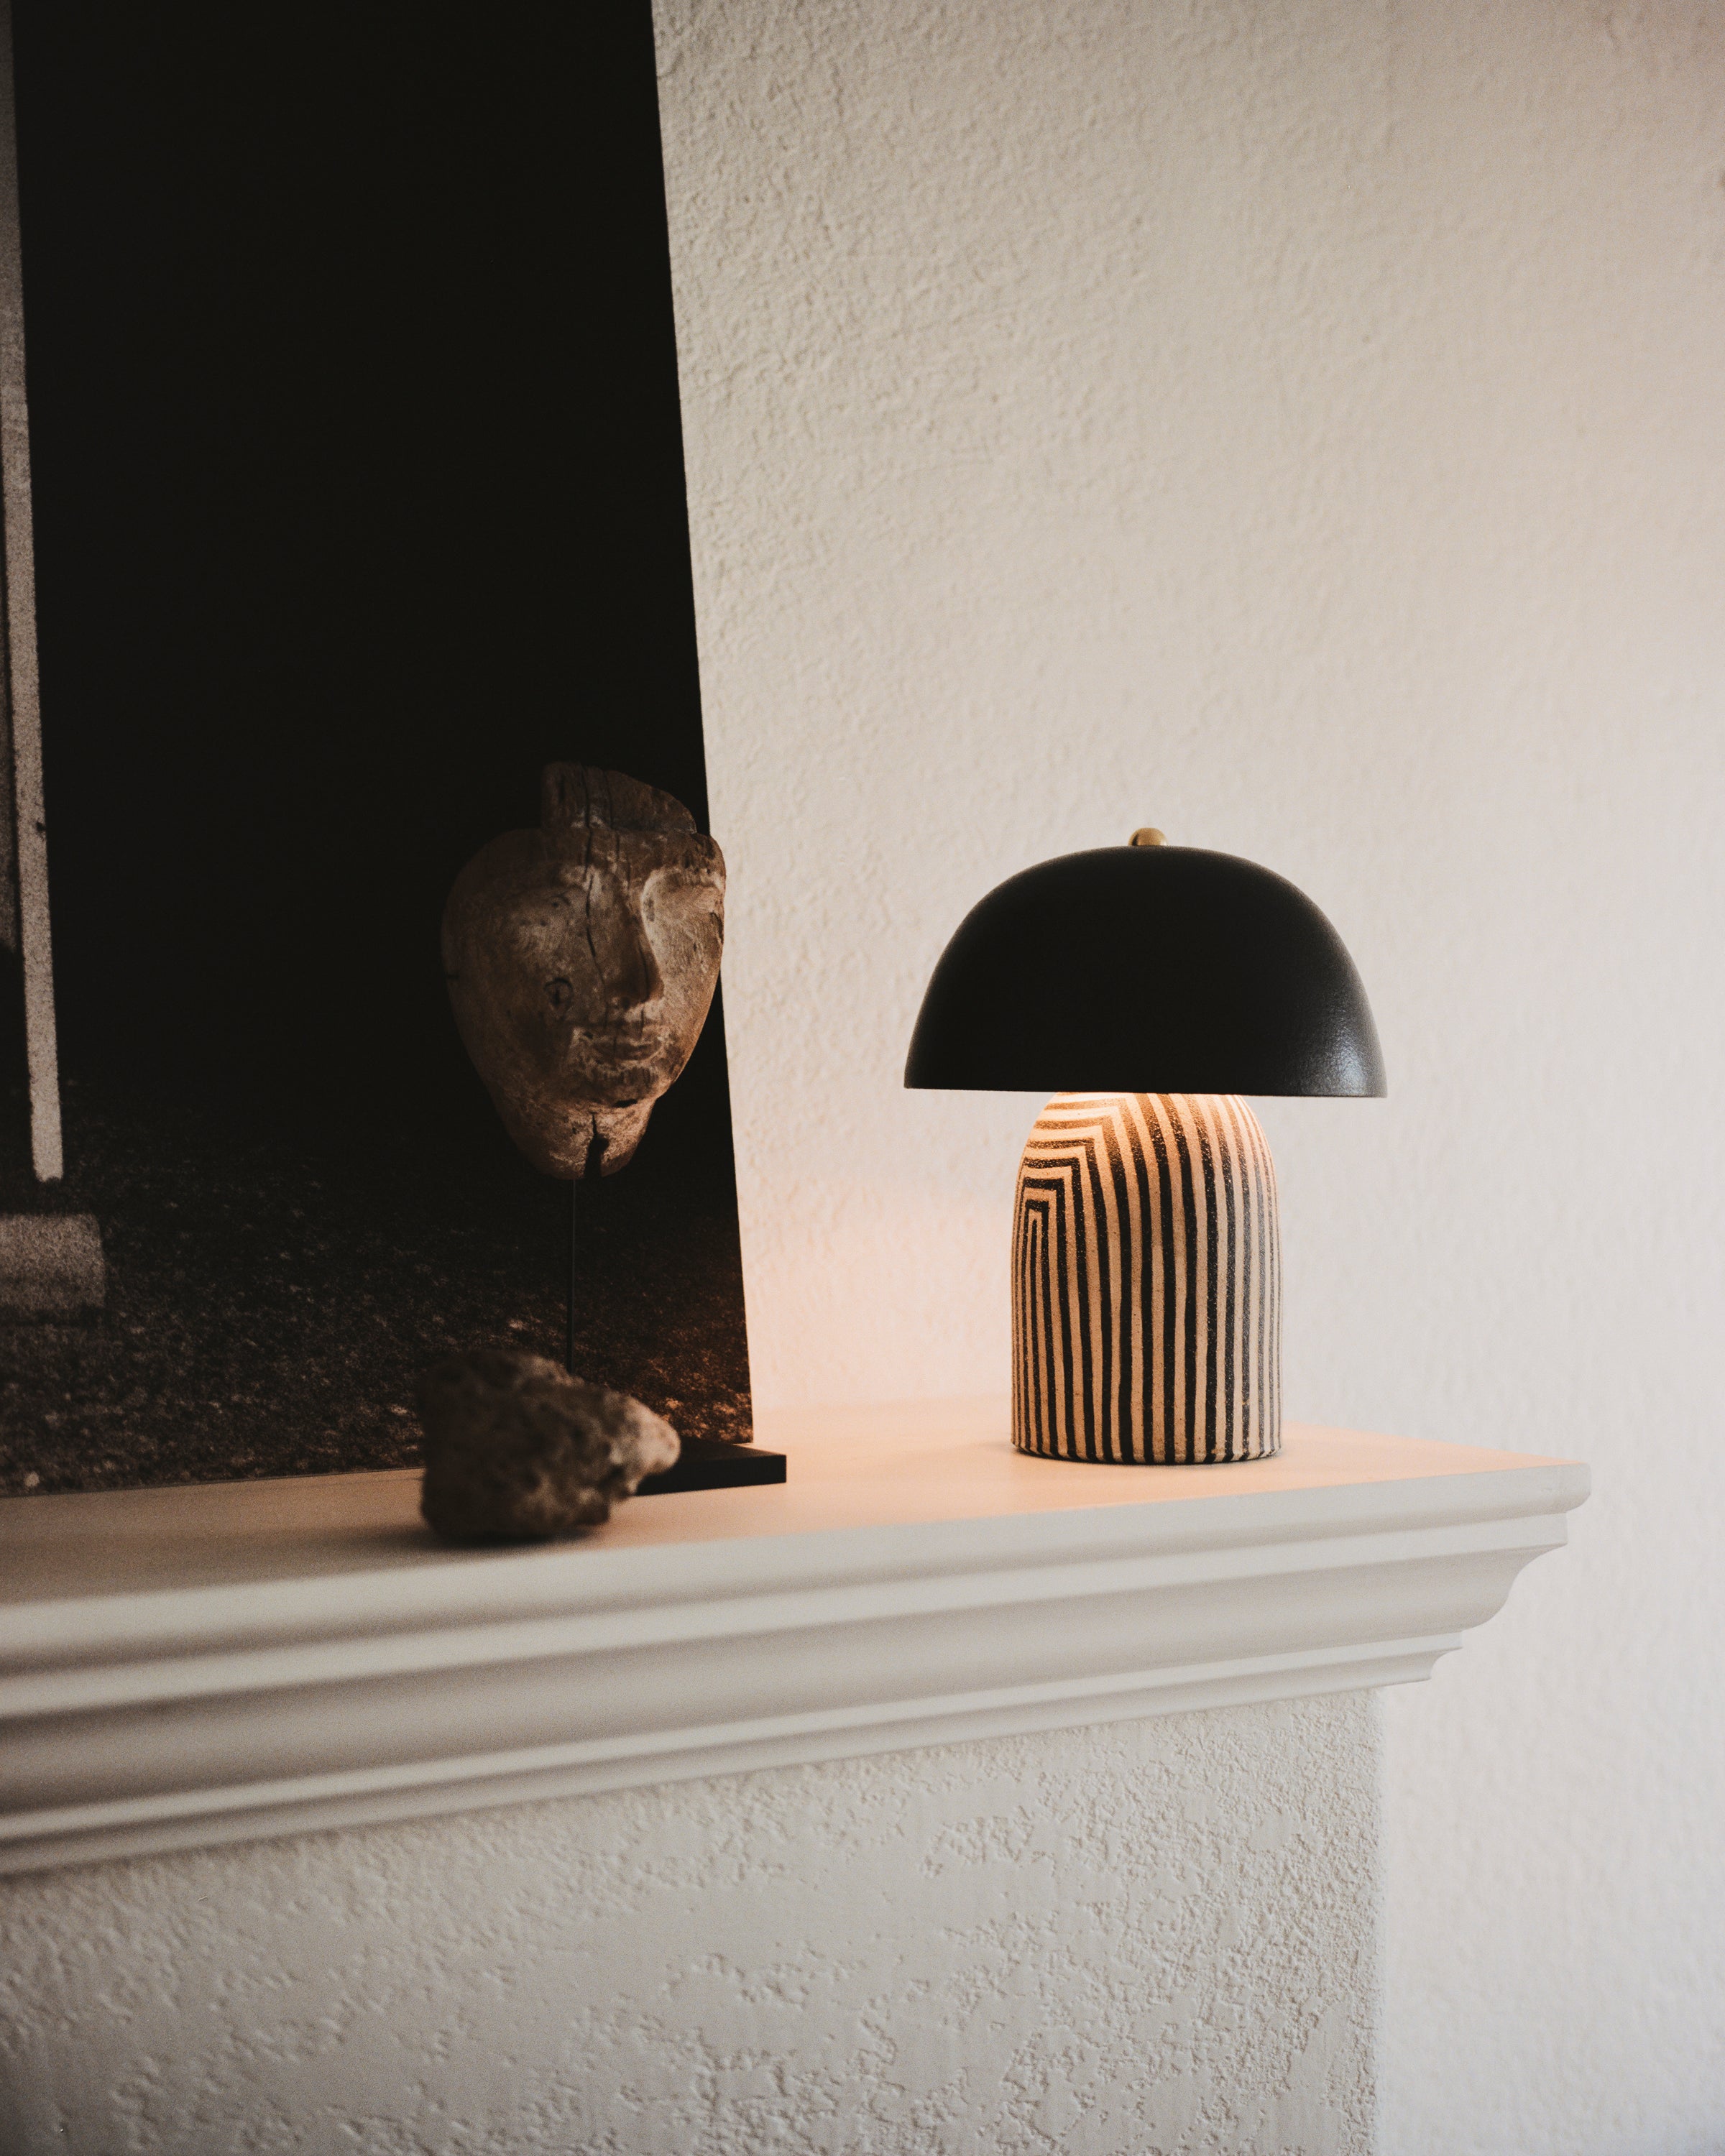 Ceramicah Tera Lamp mini in stripe with black shade on fireplace mantle